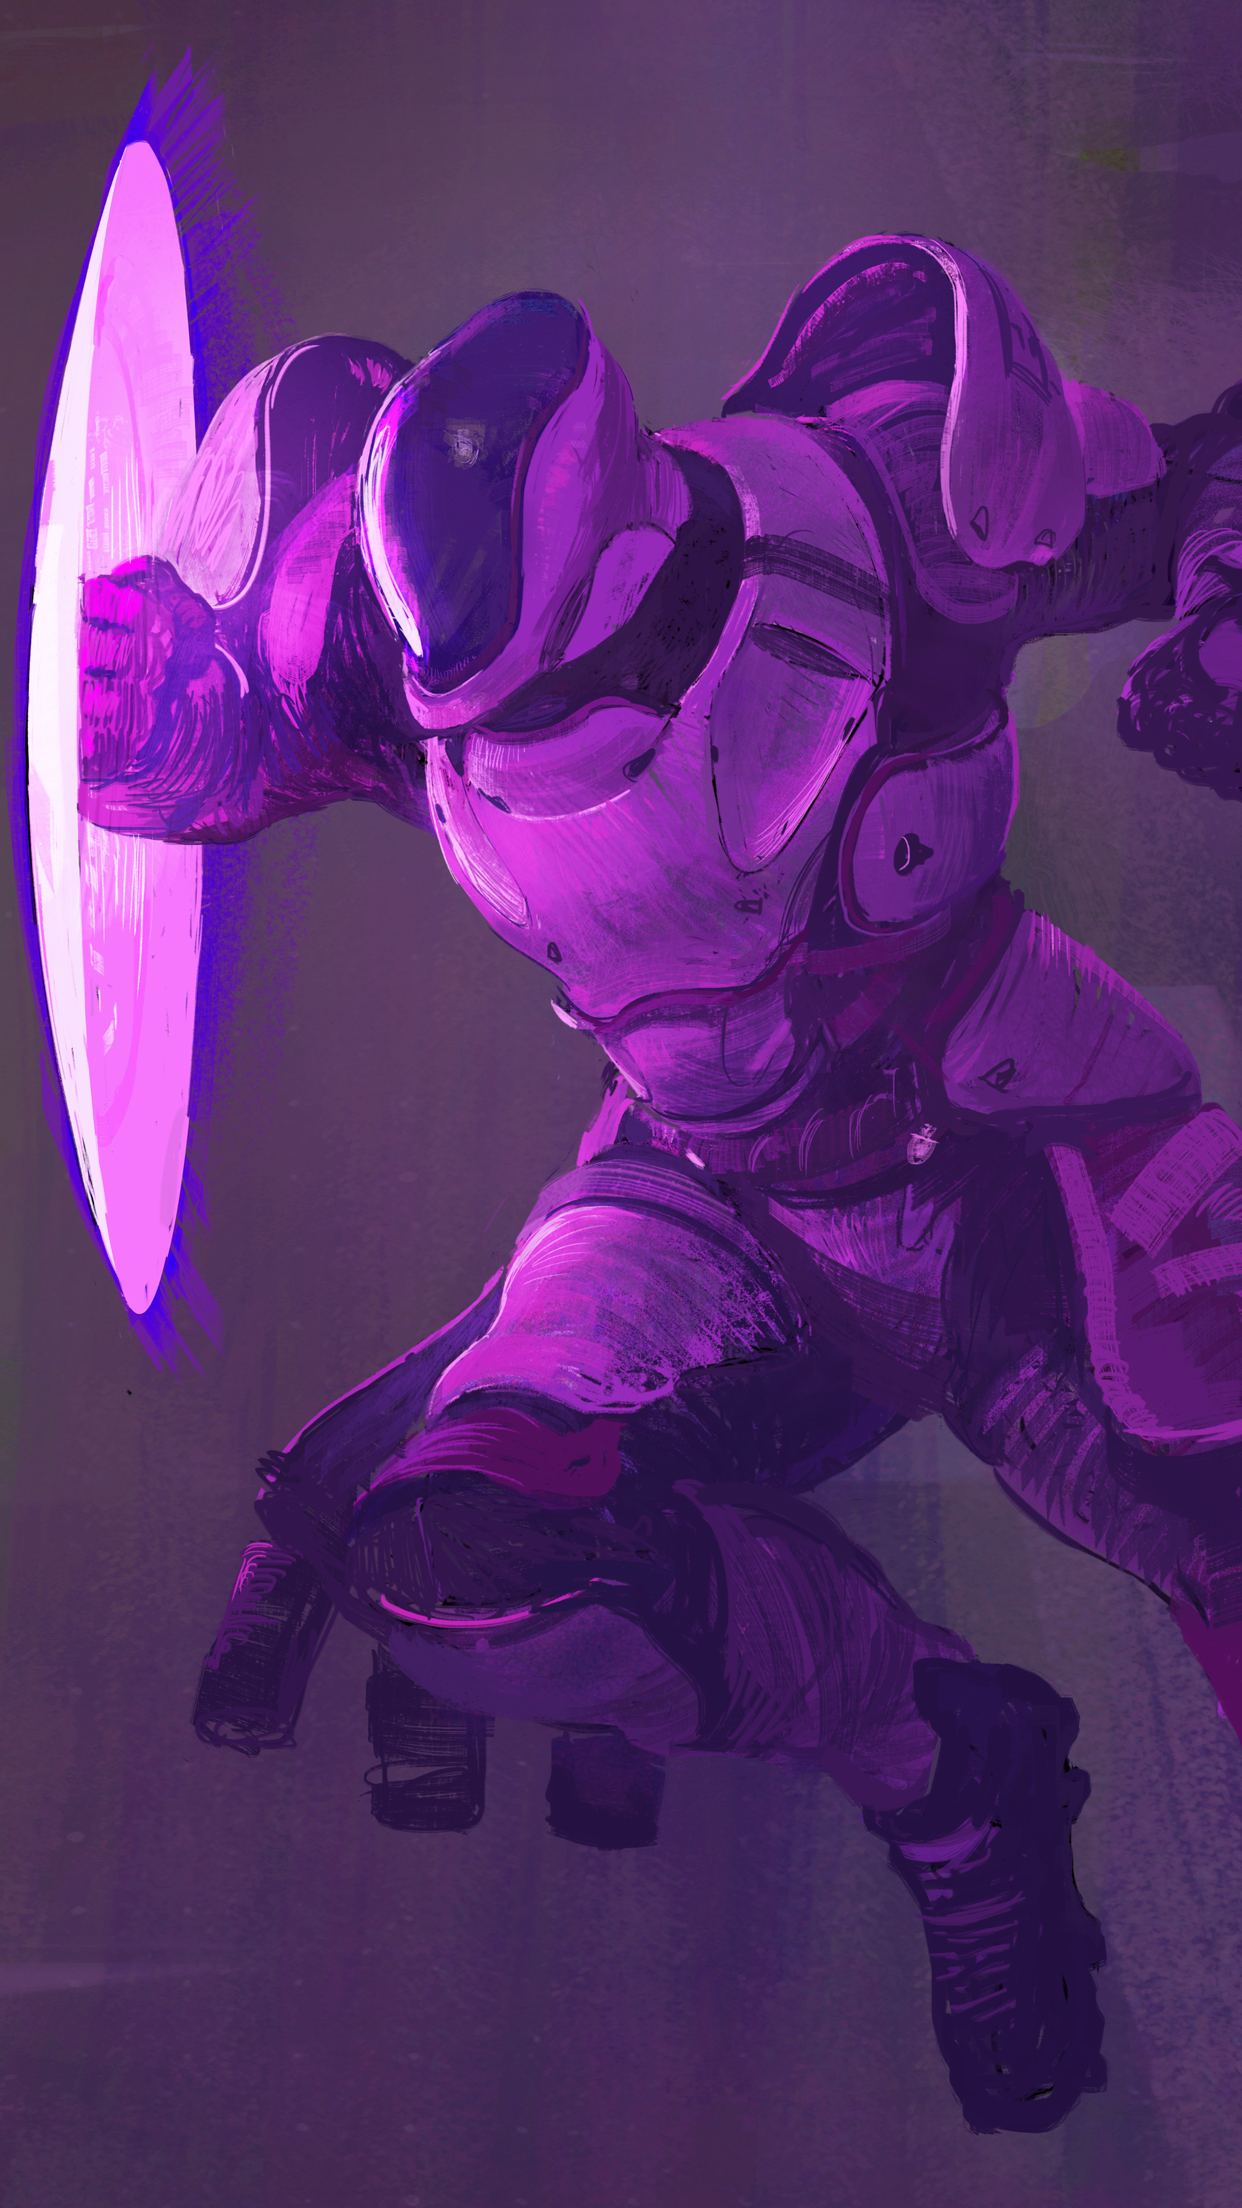 Destiny 2 game character in a dynamic pose with a glowing shield, perfect for a mobile phone wallpaper.